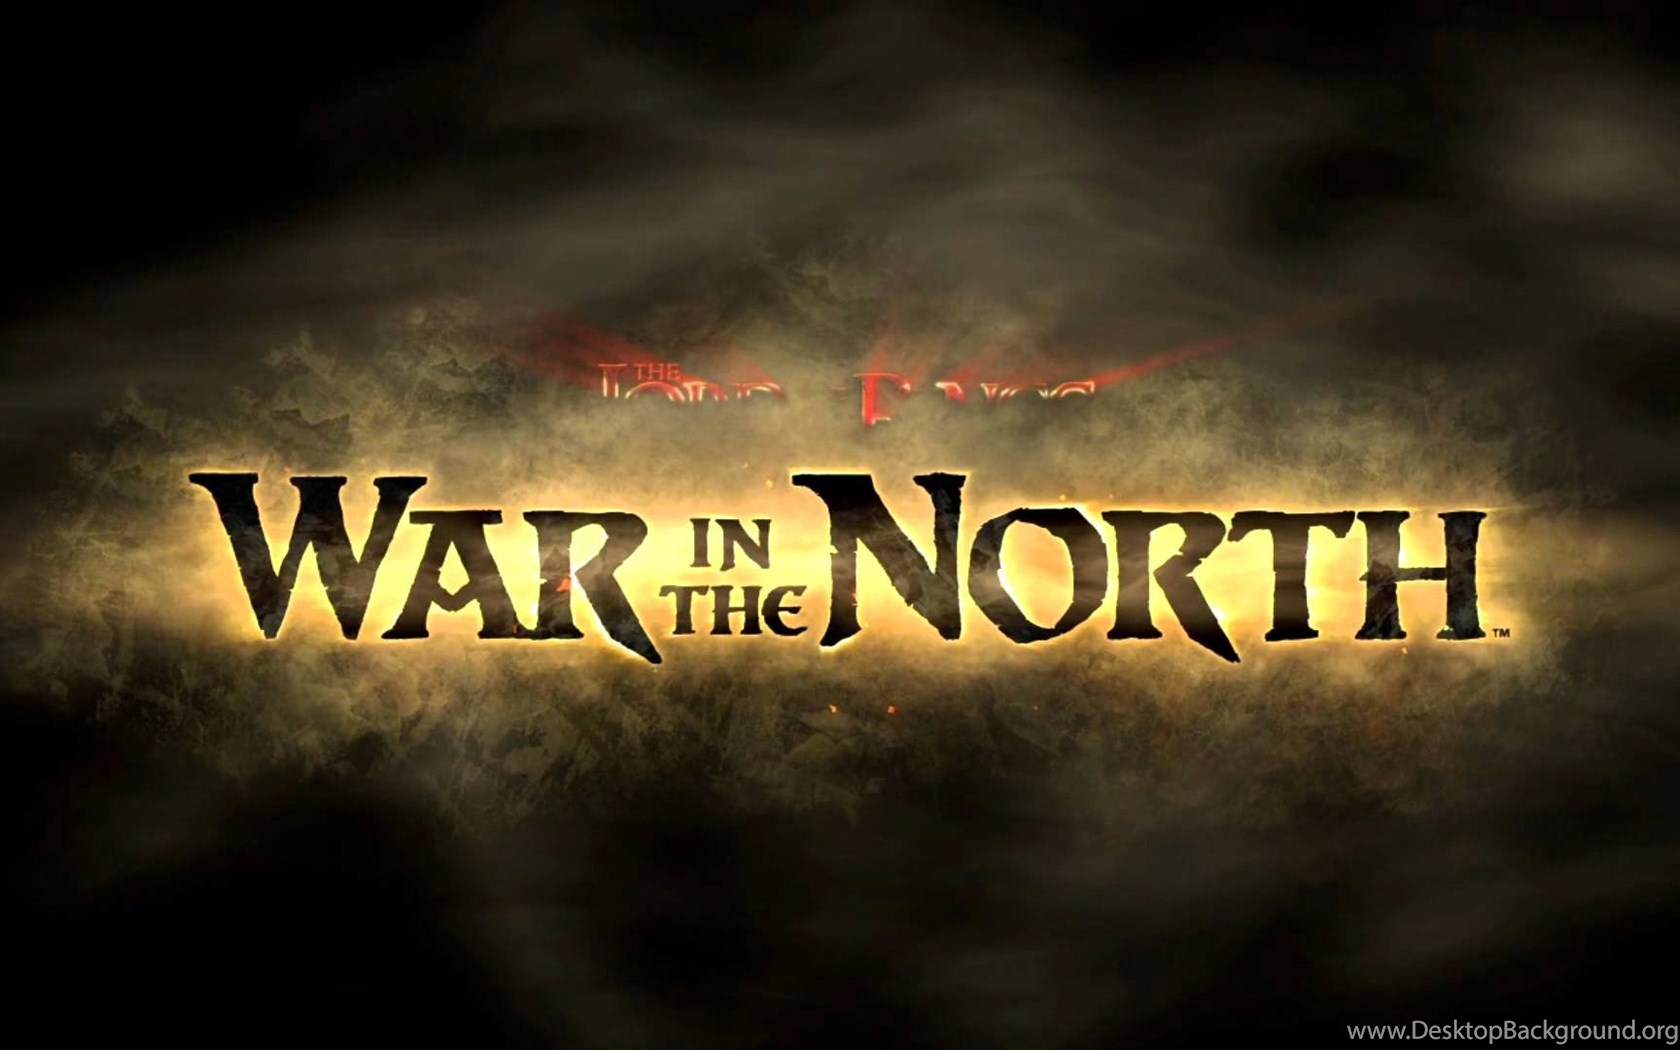 Lord of the rings war in the north купить ключ steam фото 72